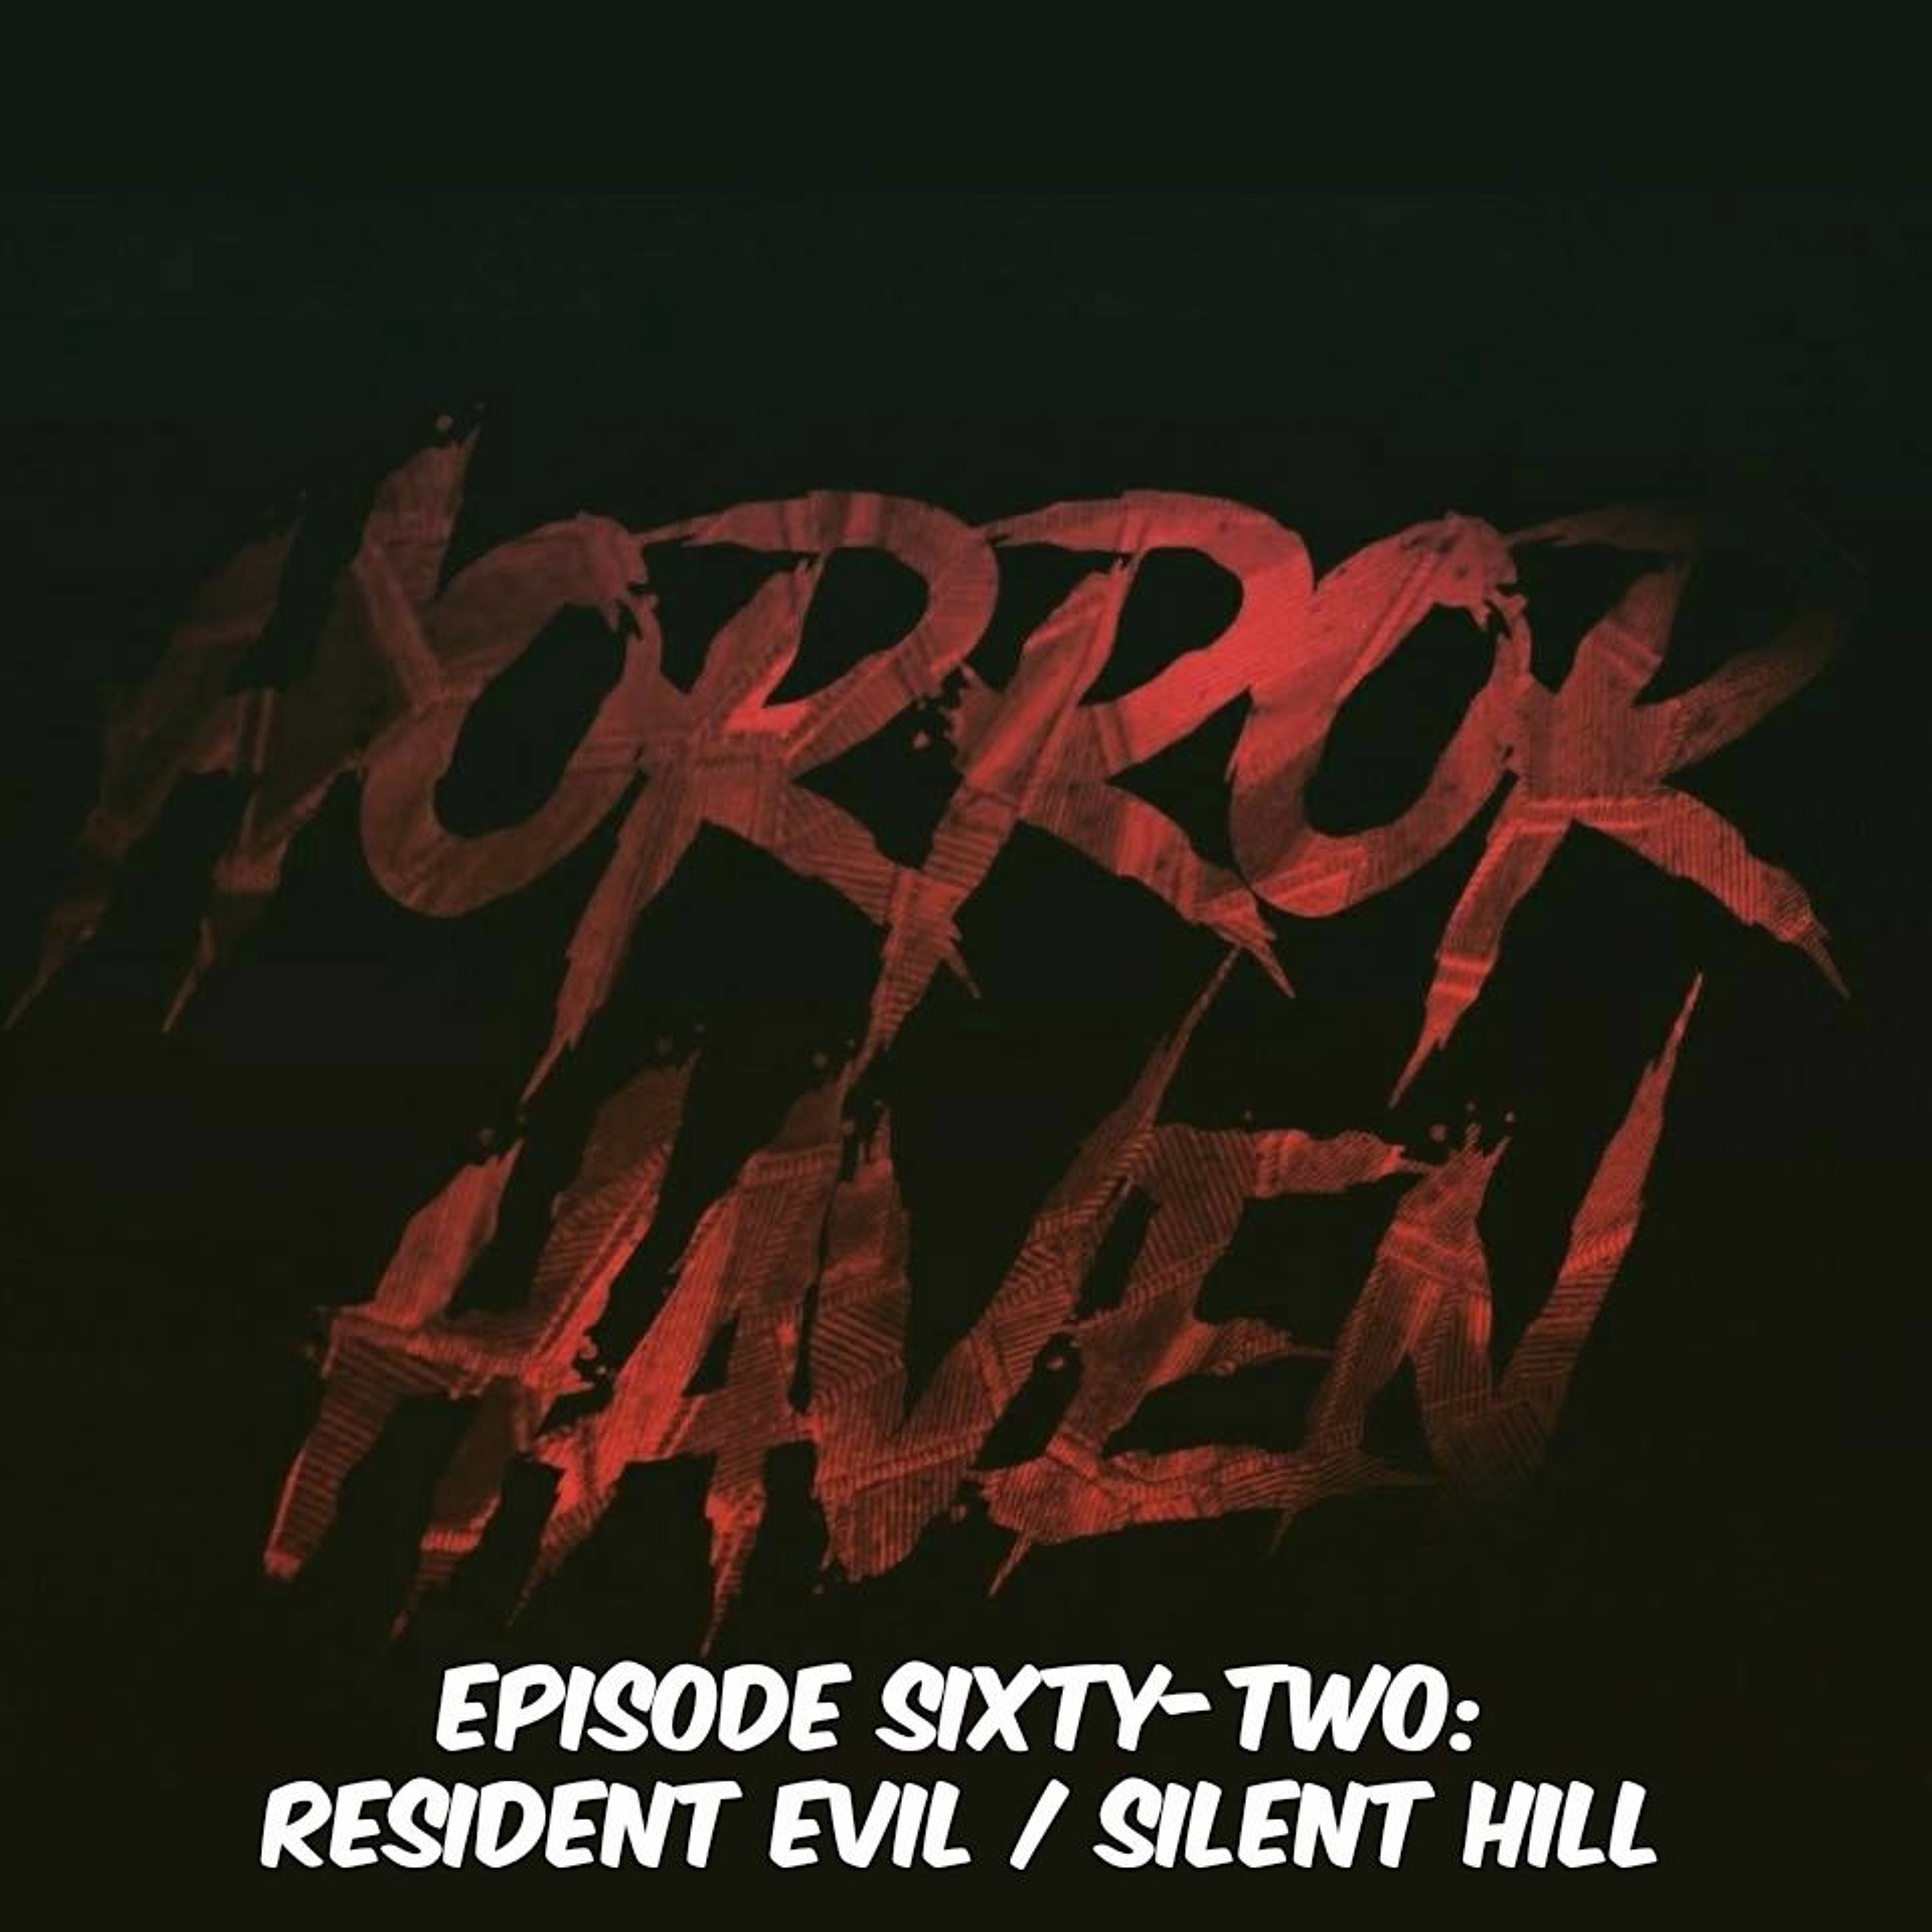 Episode Sixty-Two:  Resident Evil / Silent Hill